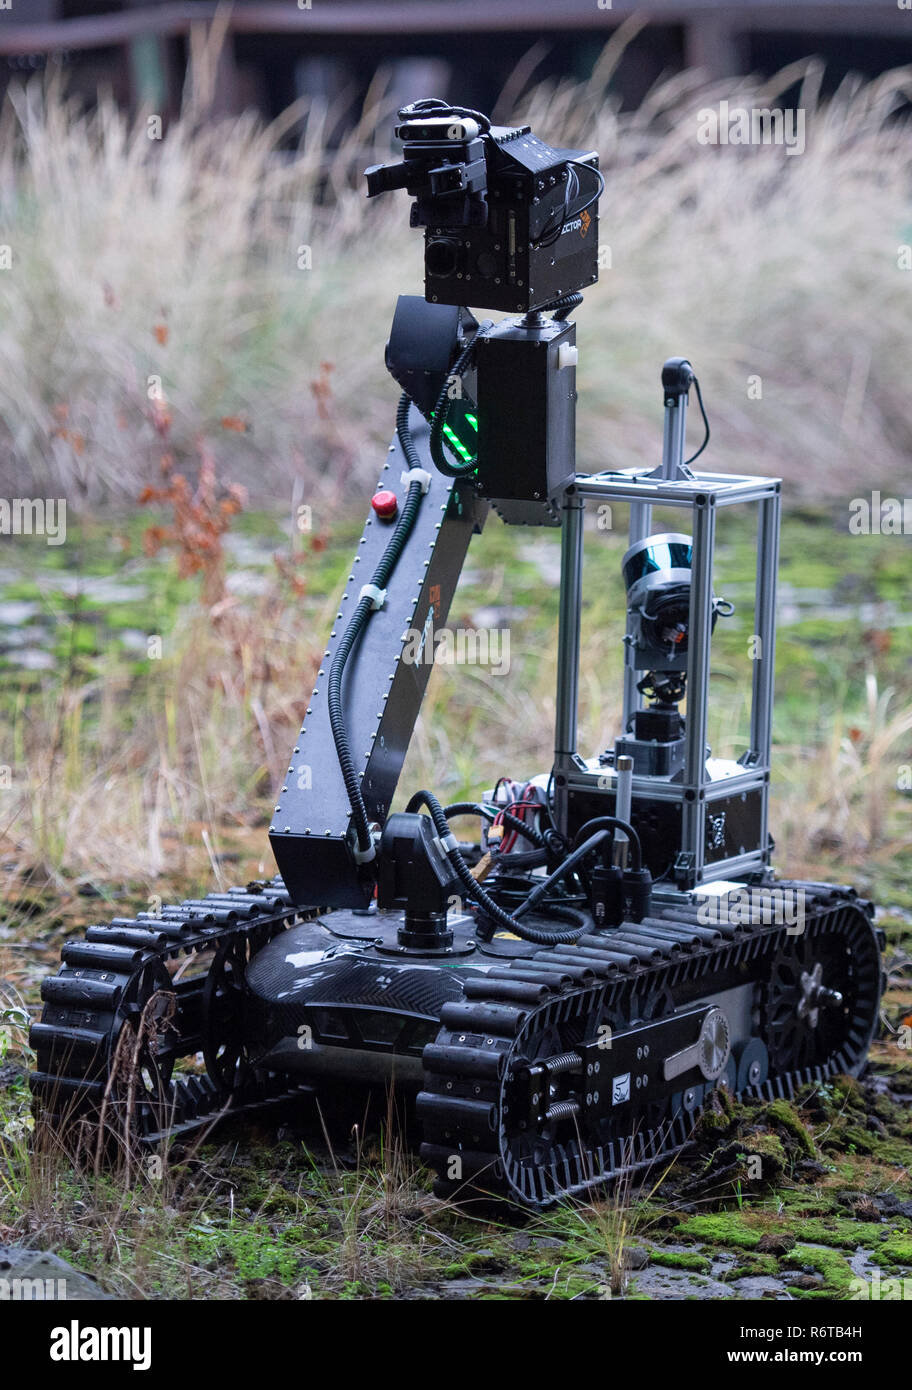 Dortmund, Germany. 06th Dec, 2018. The reconnaissance robot "Hector" is  exhibited at a presentation. The robot is part of a research project for  rescue robots at the Technical University of Darmstadt. Credit: